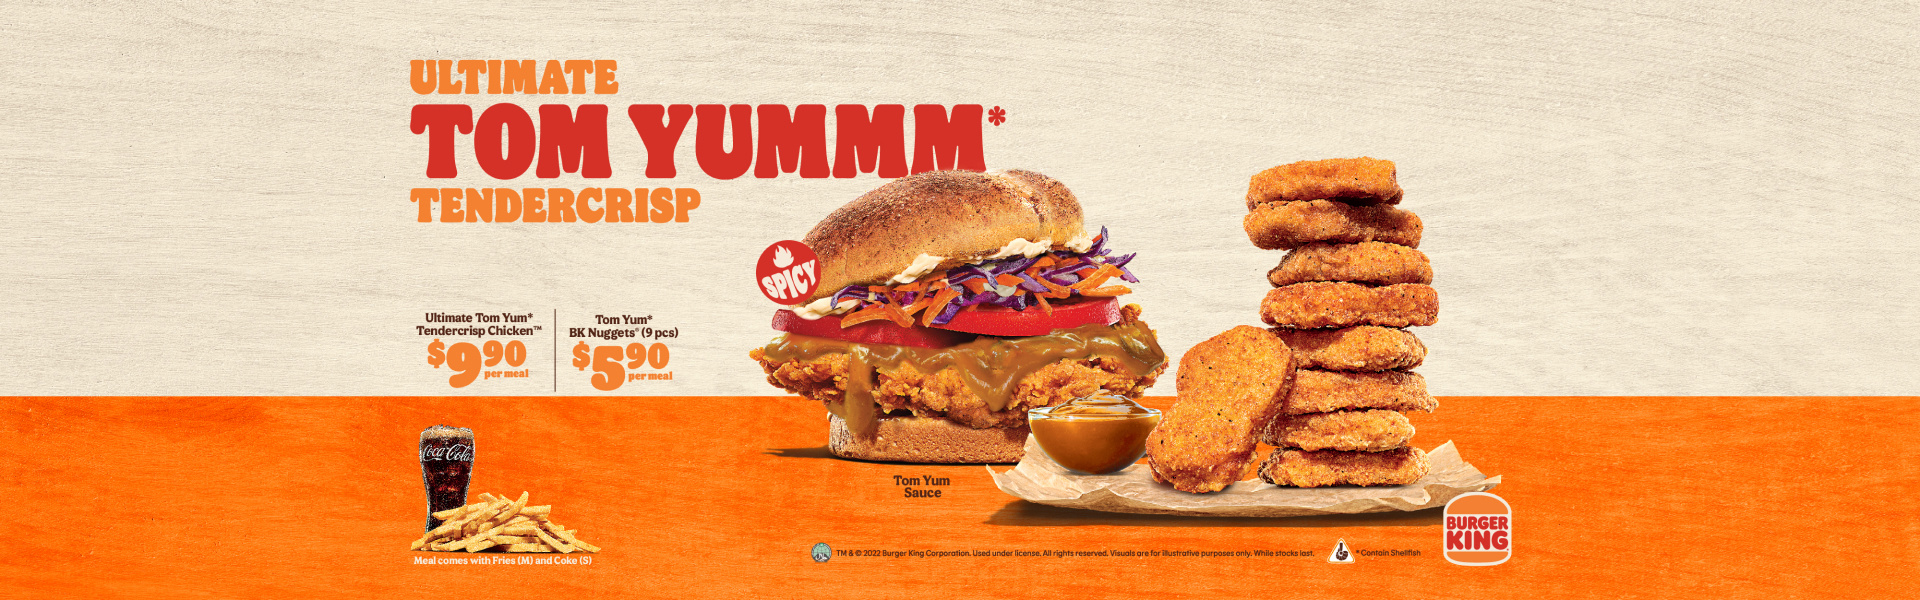 Burger King S’pore now selling Tom Yum burger, nuggets and drumlets; has mango-sticky pie too - 1